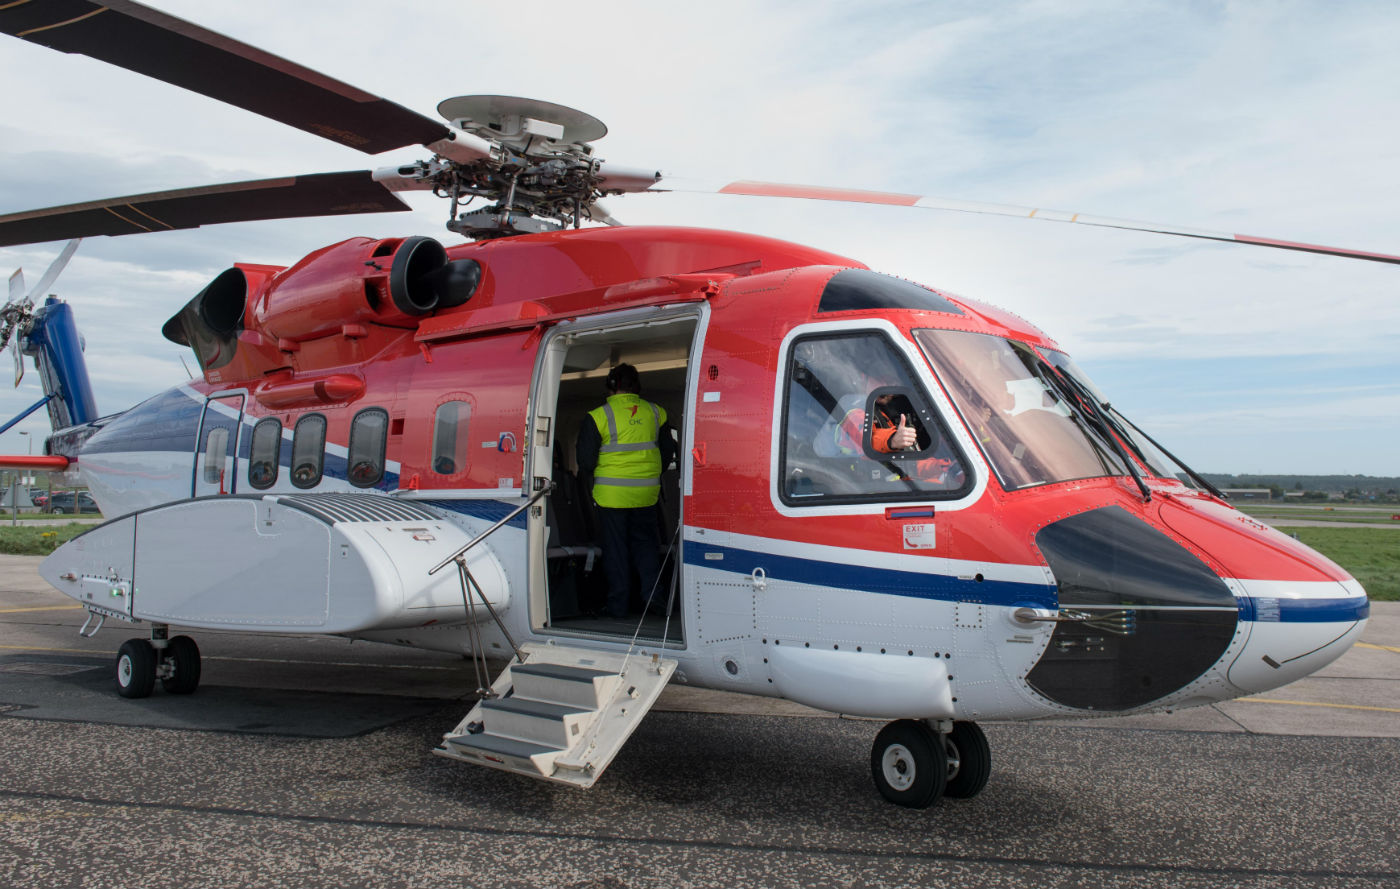 The contract will see a dedicated Sikorsky S-92 flying out of Cork Airport beginning this June and will once again see CHC work in conjunction with Lloyd’s Register, as the wells project management company. CHC Photo